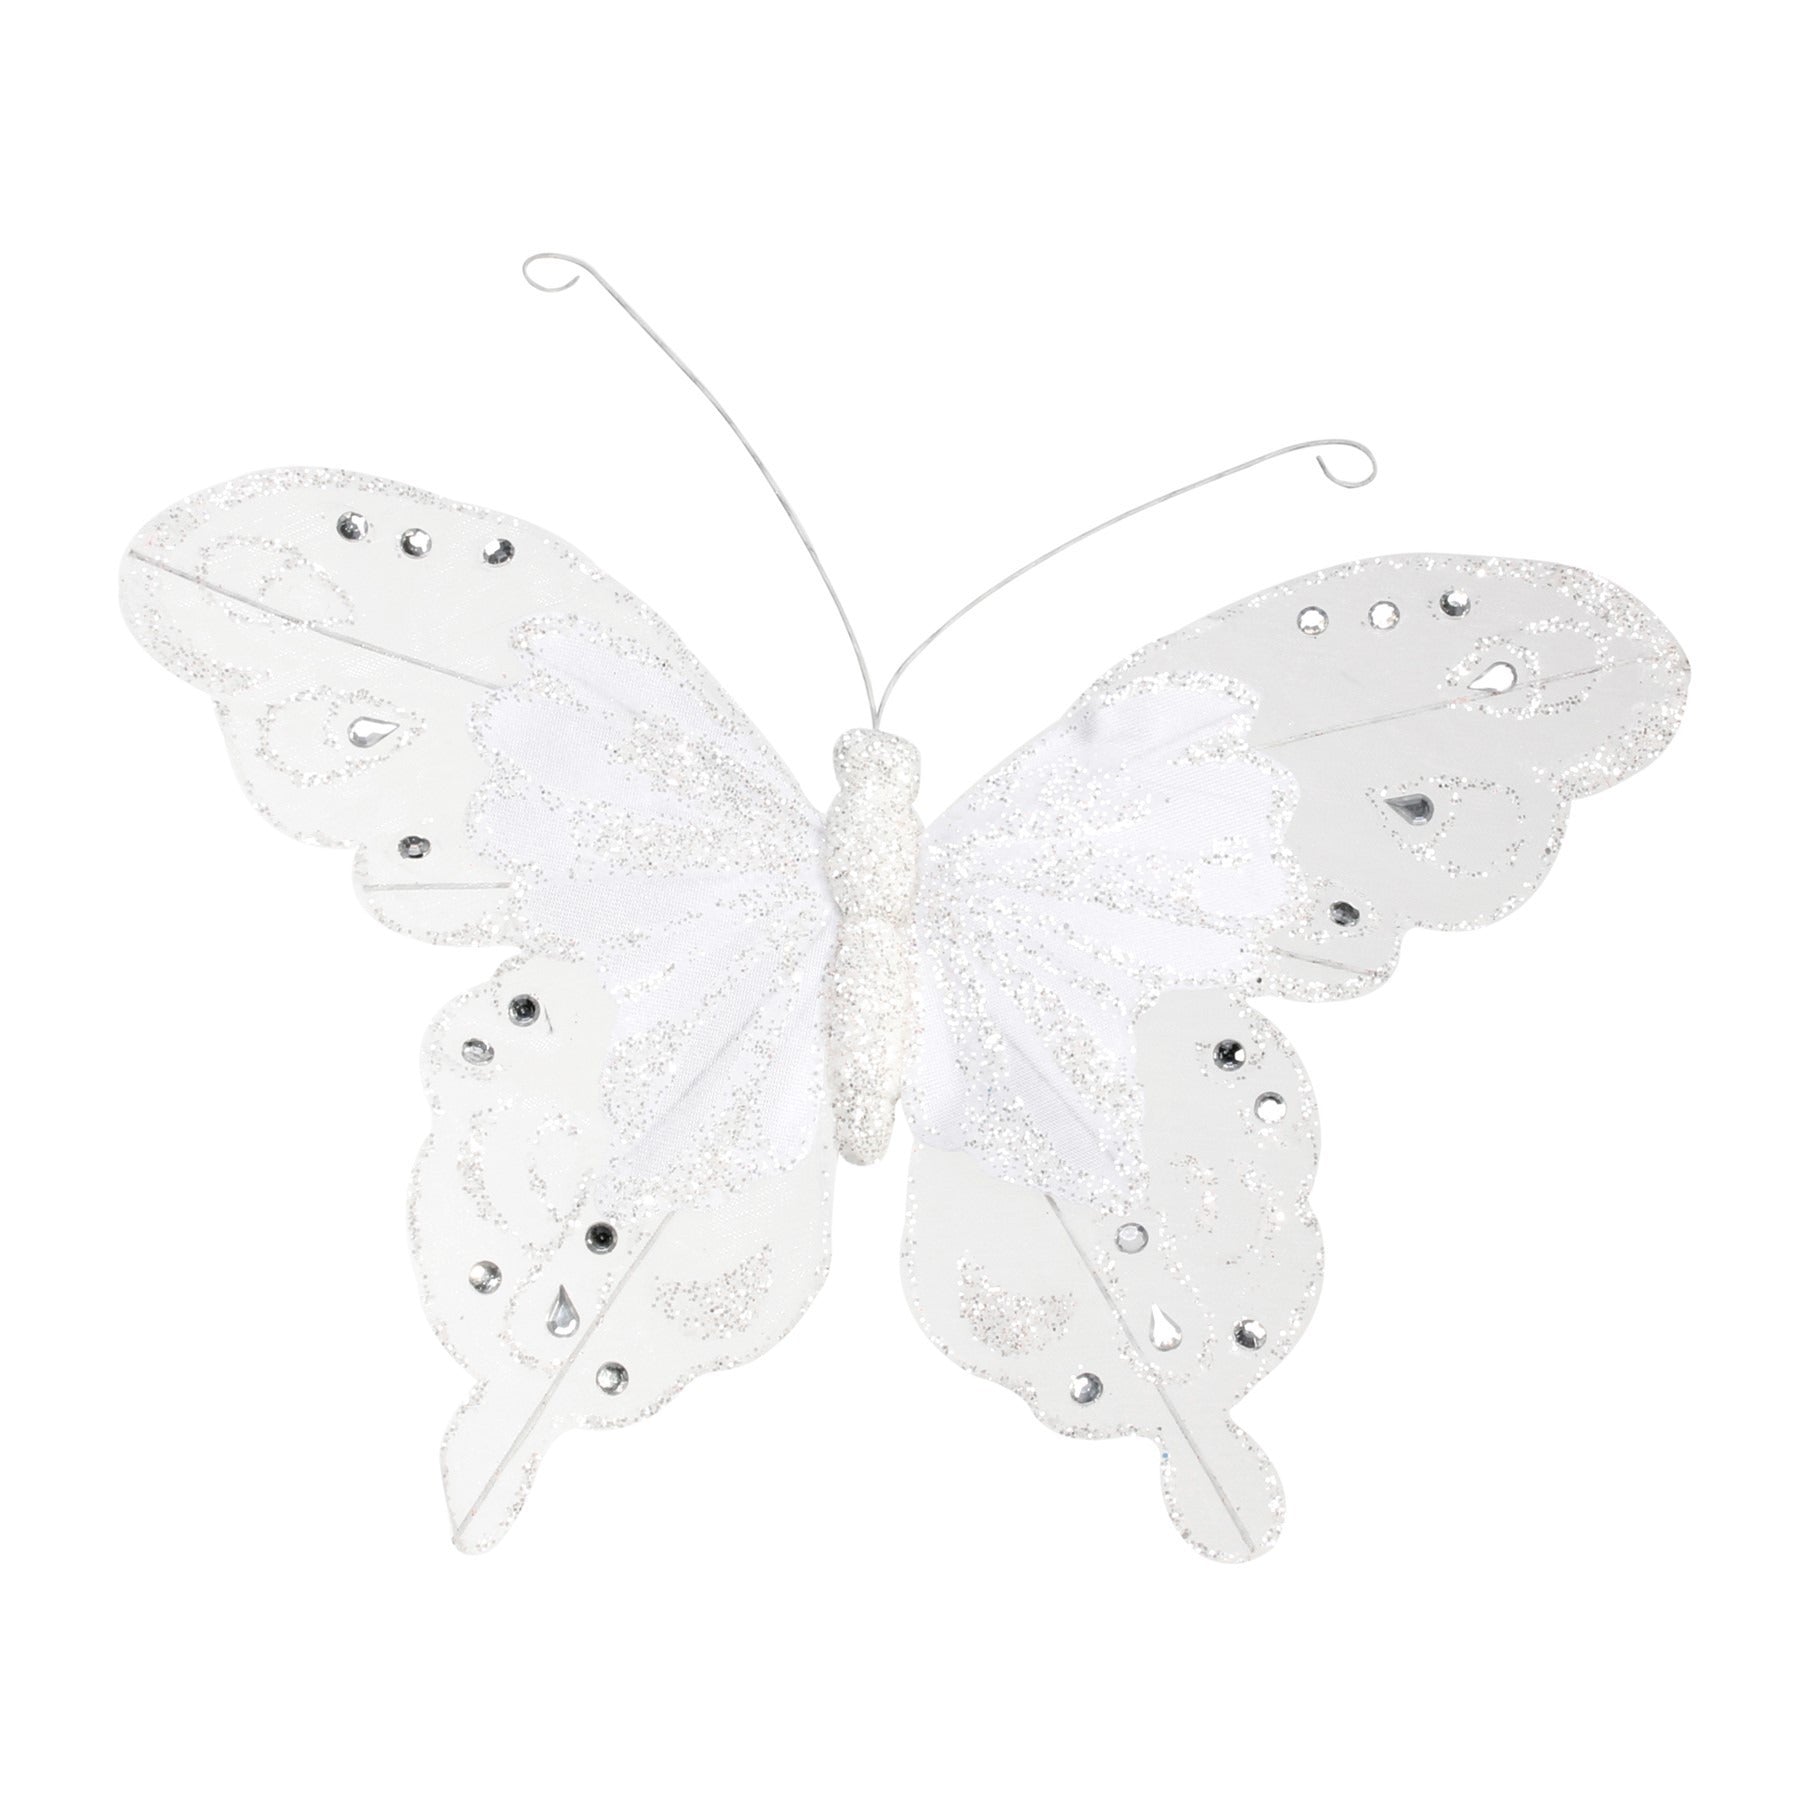 View 24cm White Fabric Glitter Butterfly Pack of 6 information